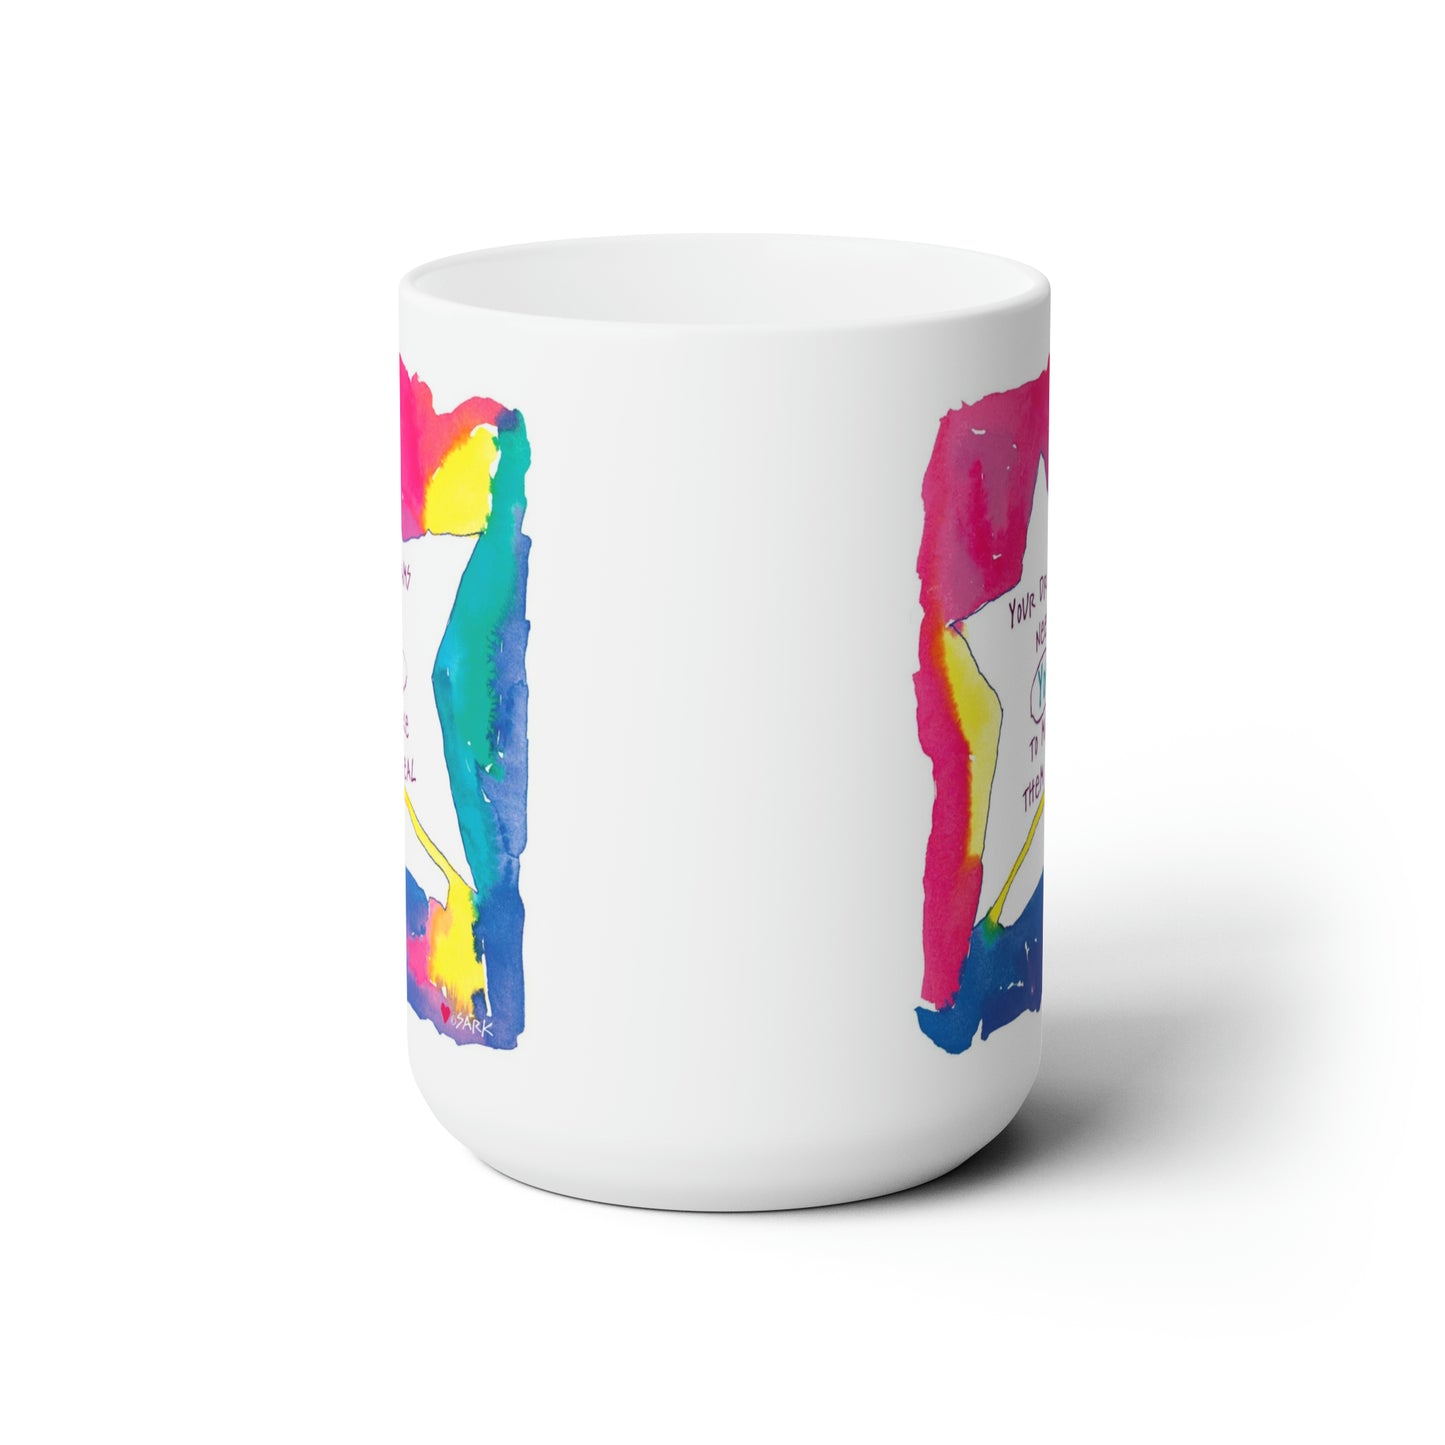 Your Dreams Need YOU To Make Them REAL by SARK - White Ceramic Mug